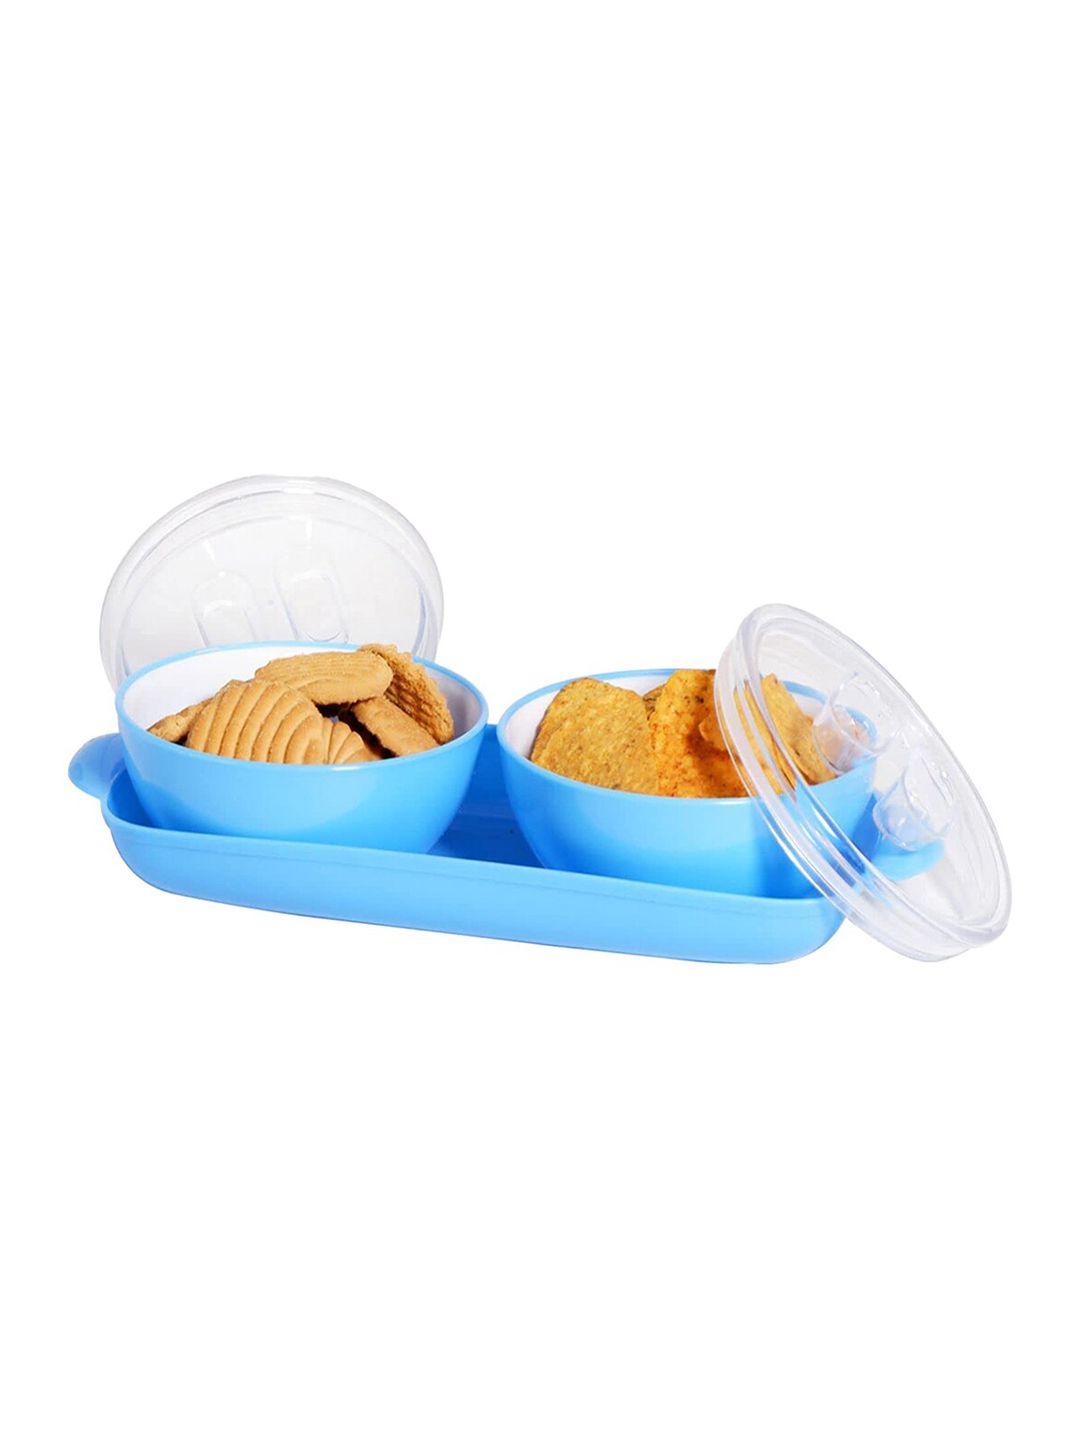 Kuber Industries Set Of 3 Blue Bowls & Serving Tray With Silicon Rubberized Ring Lid Price in India